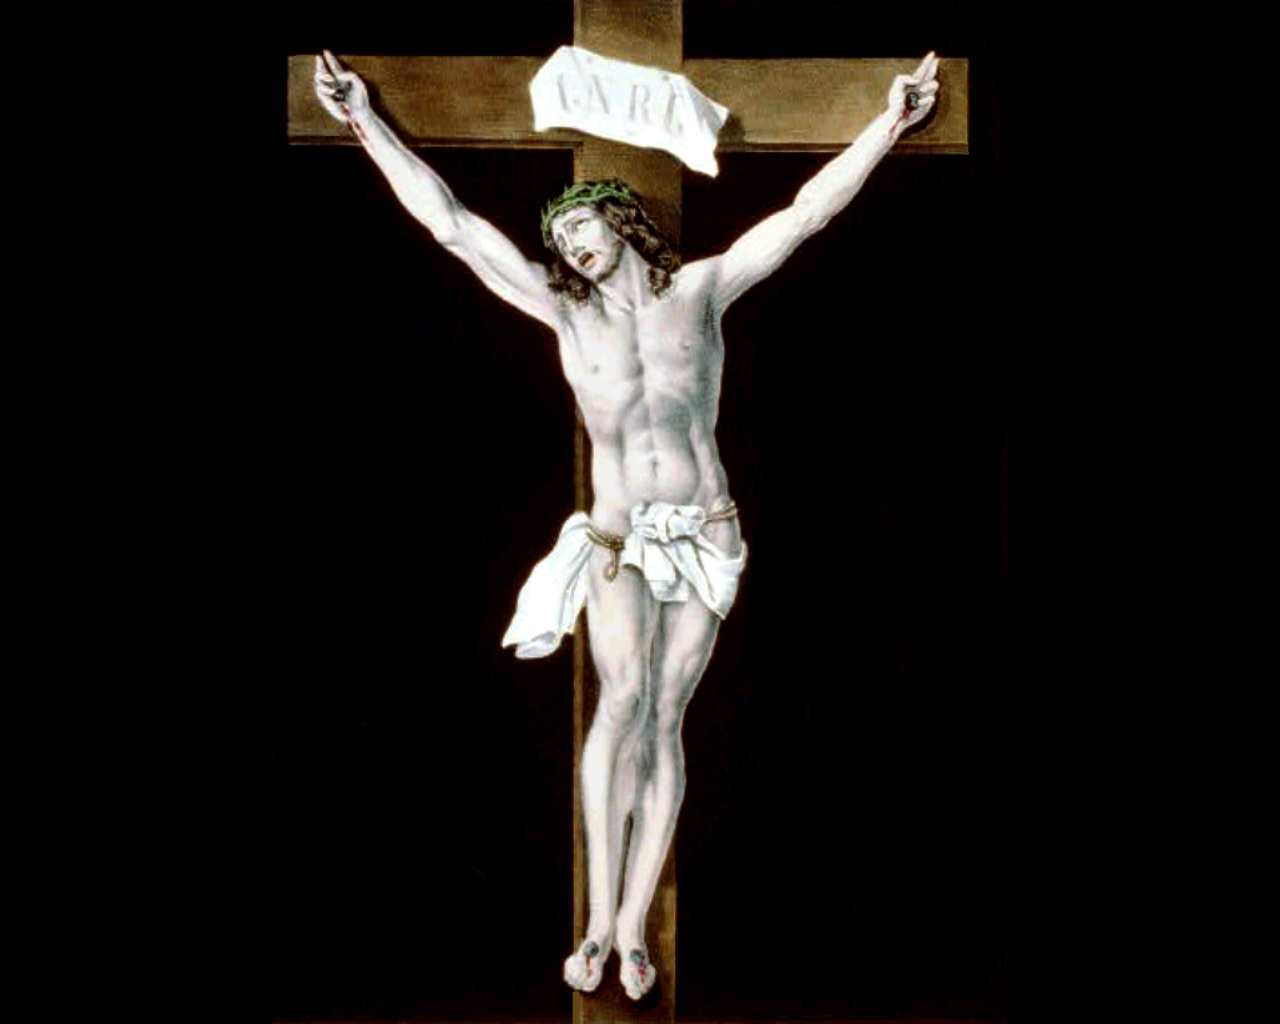 Free download Jesus on the cross Desktop and mobile wallpaper Wallippo